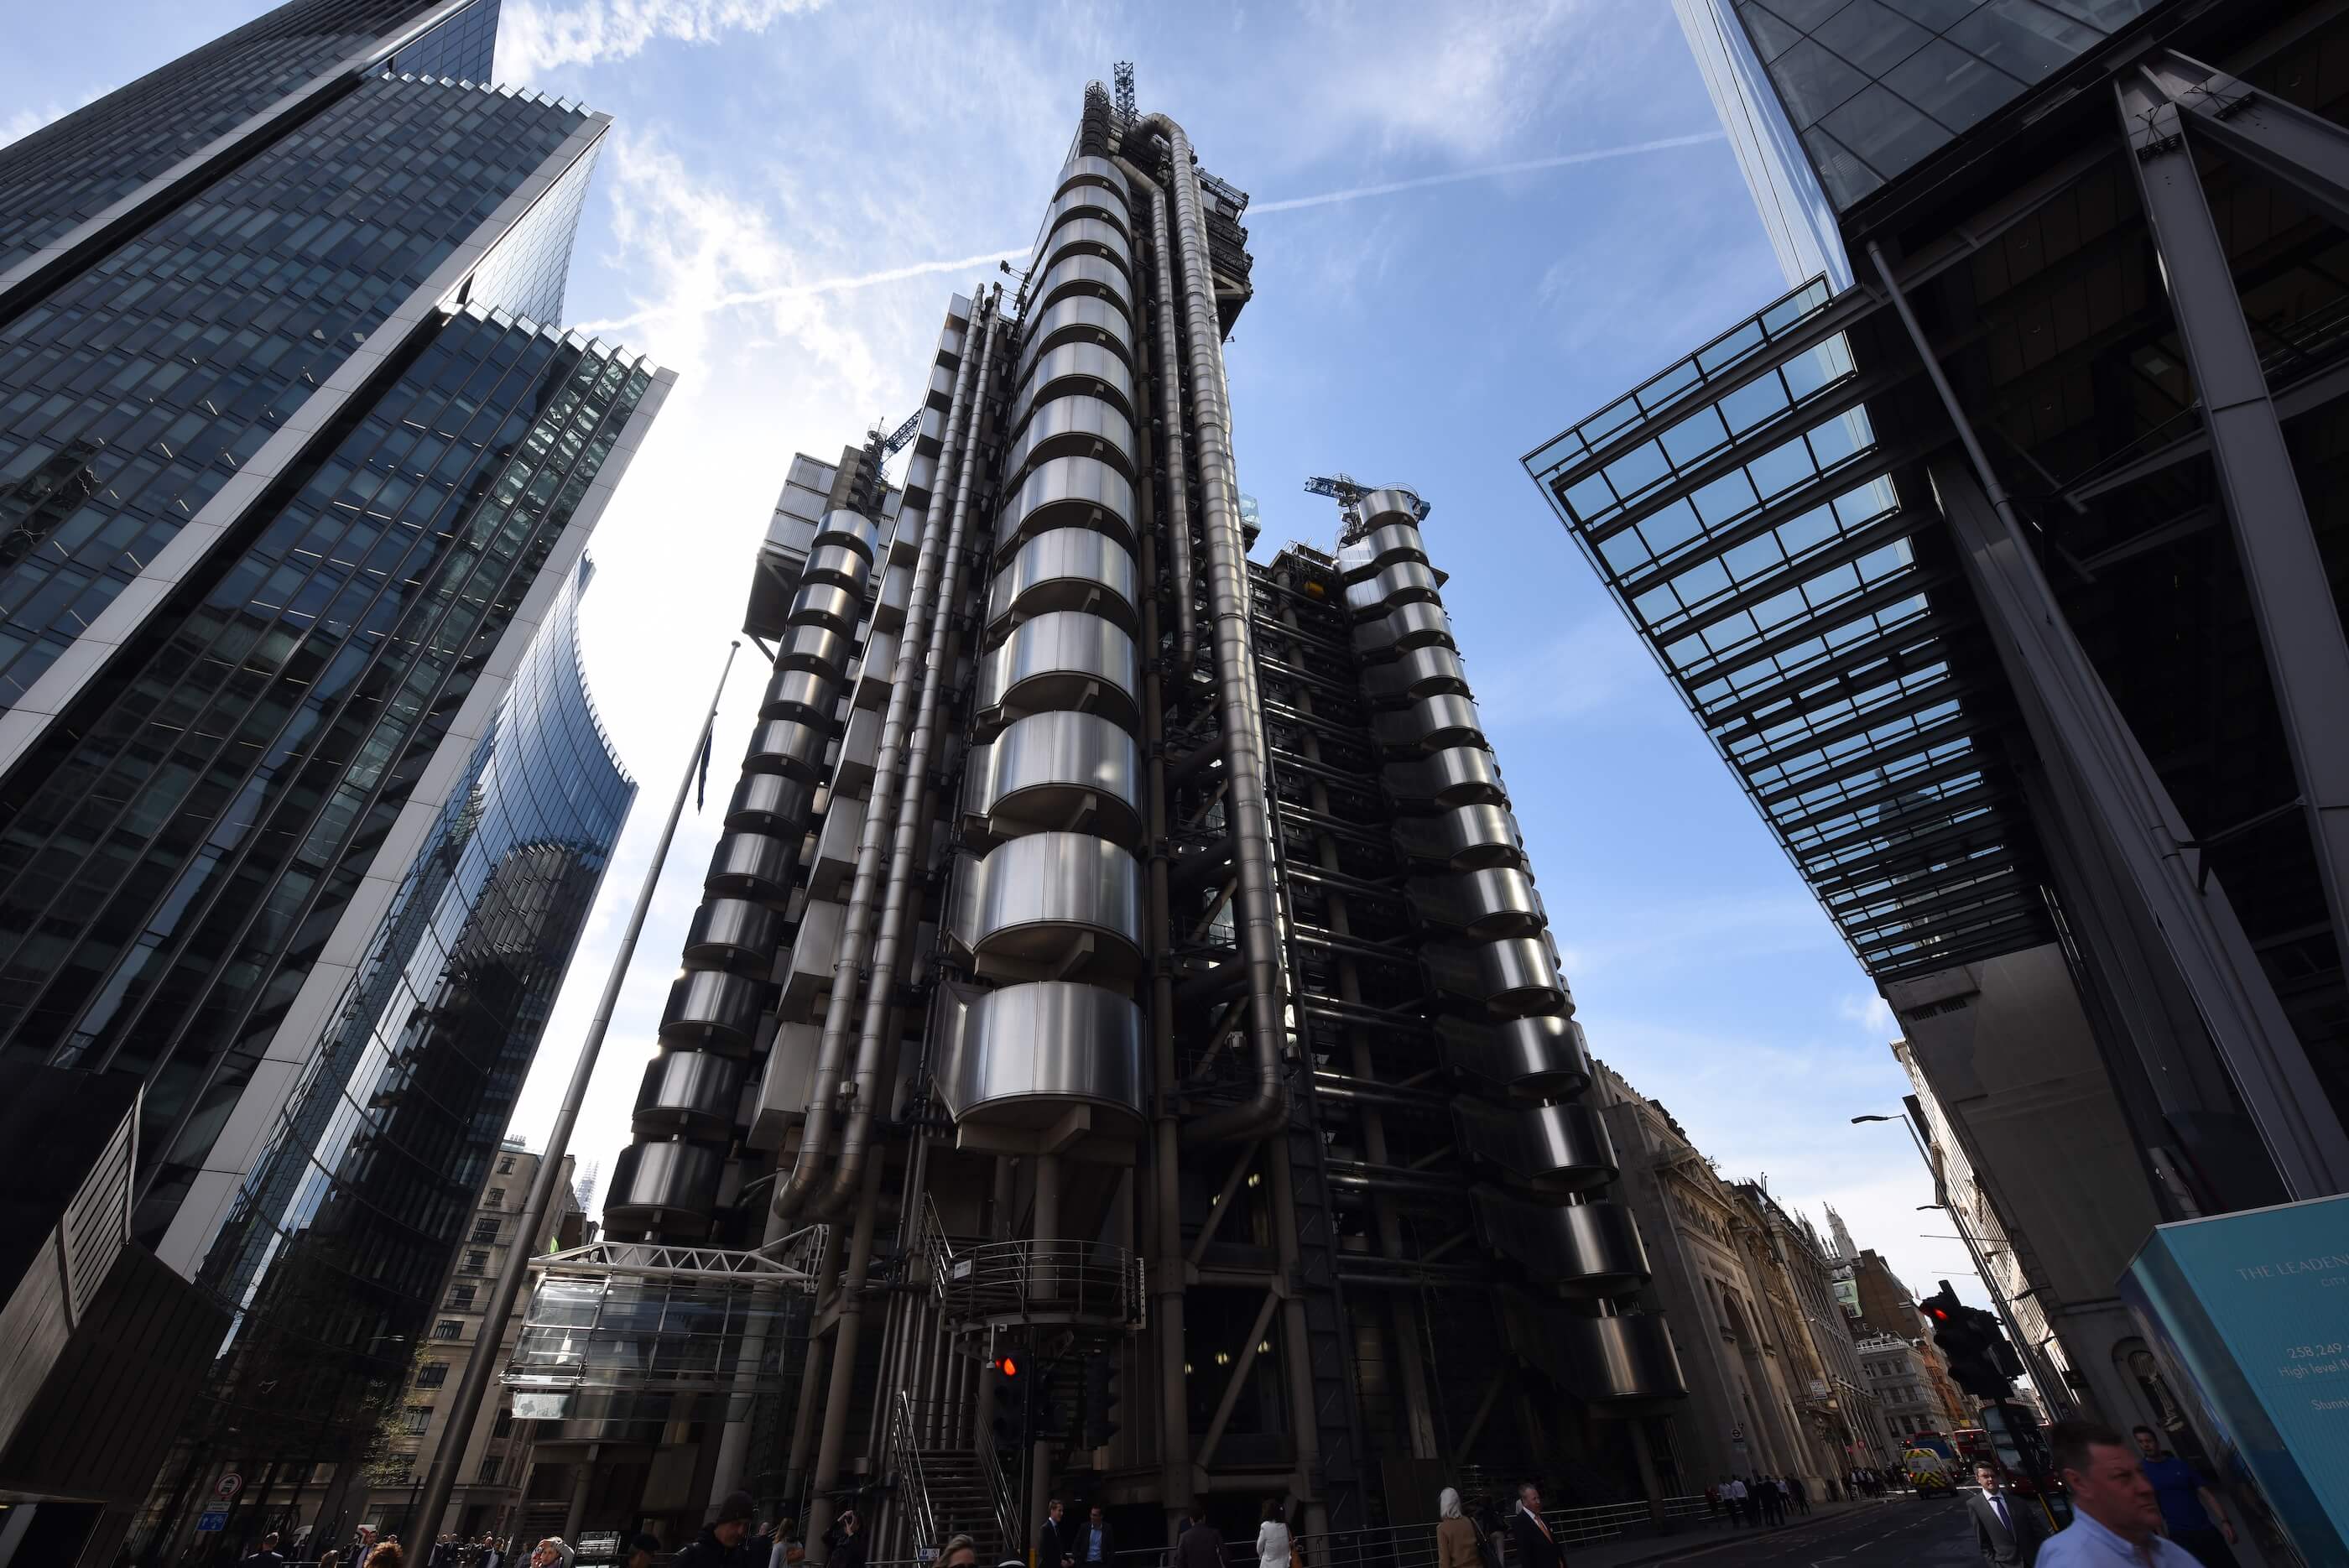 The lloyd’s of london HQ in stainless steel swirls